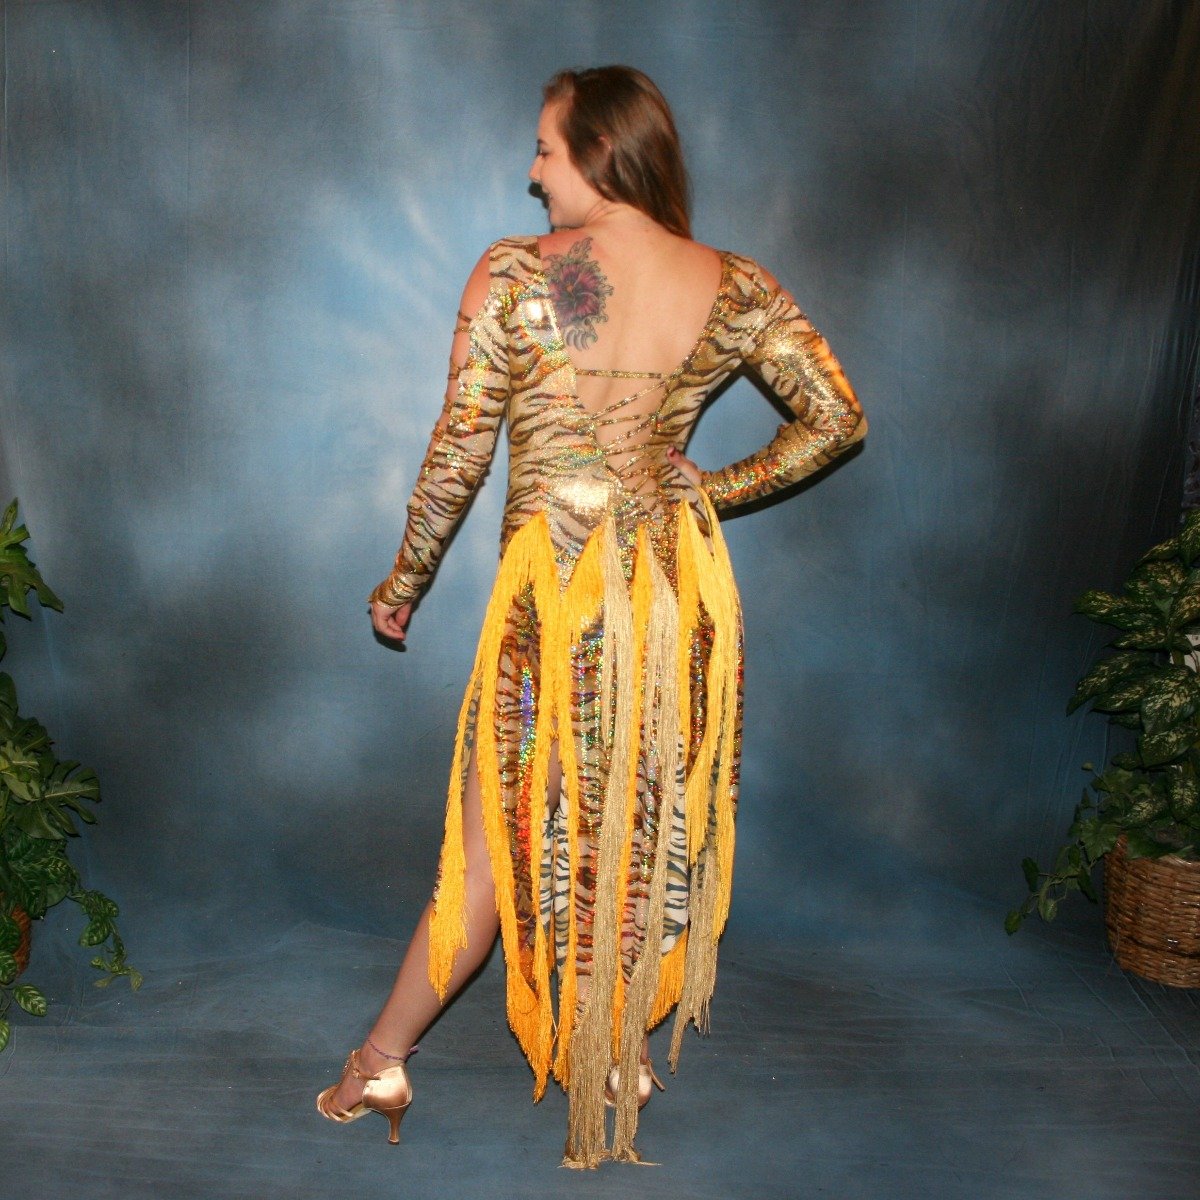 Crystal's Creations back view of gold hologram tiger print Latin/rhythm dress with fringe